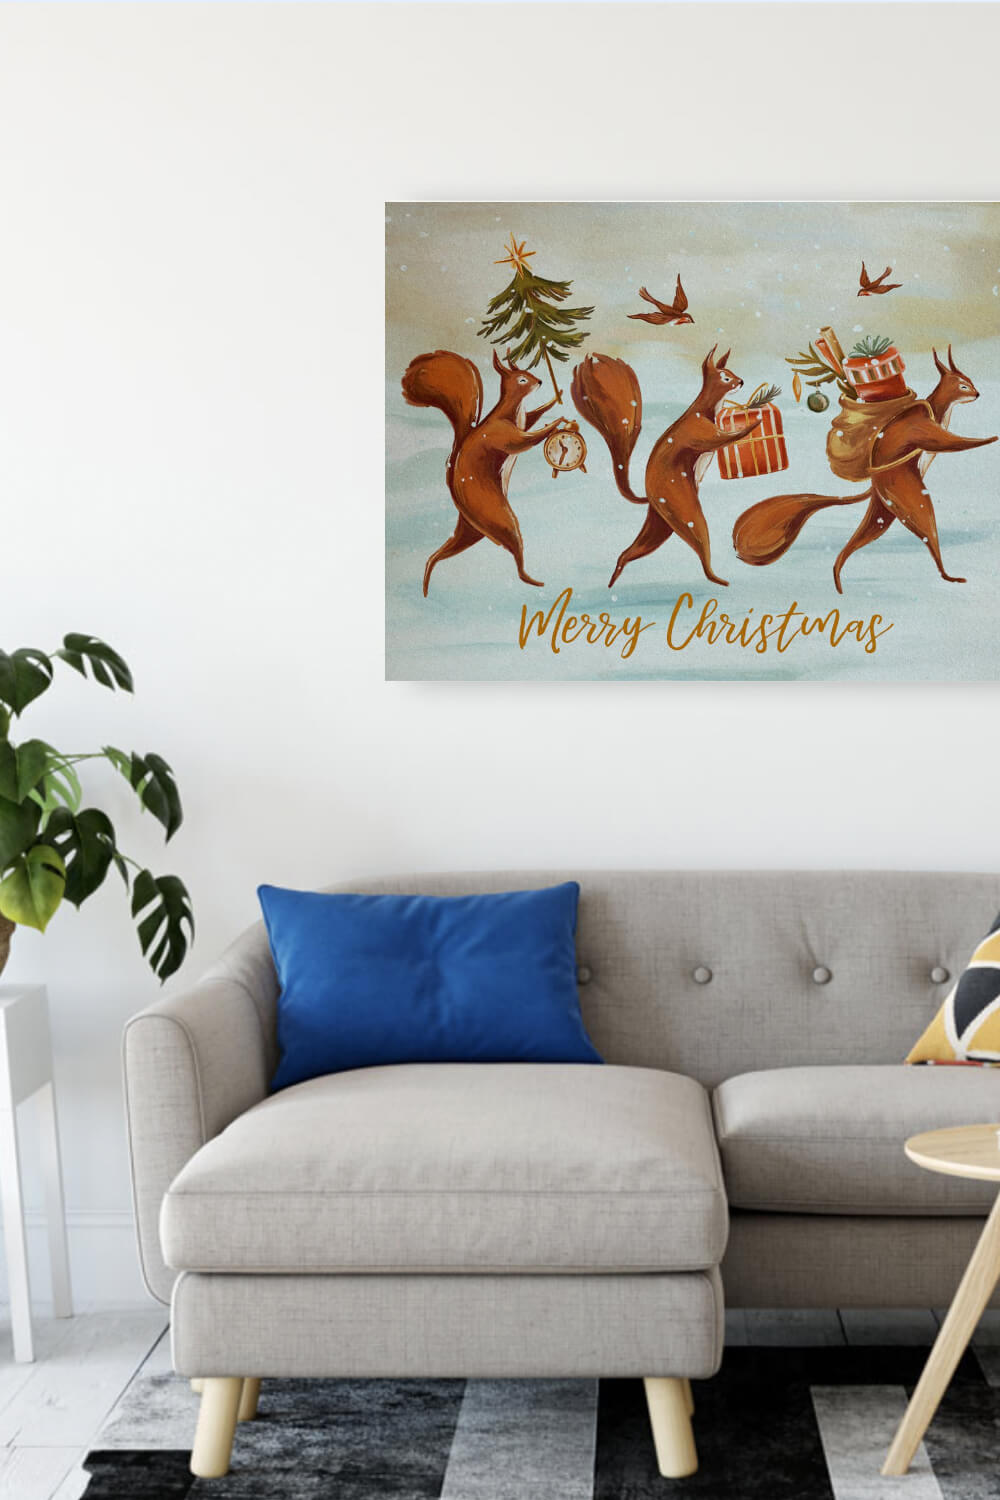 A huge Christmas picture with painted walking squirrels on a winter background.